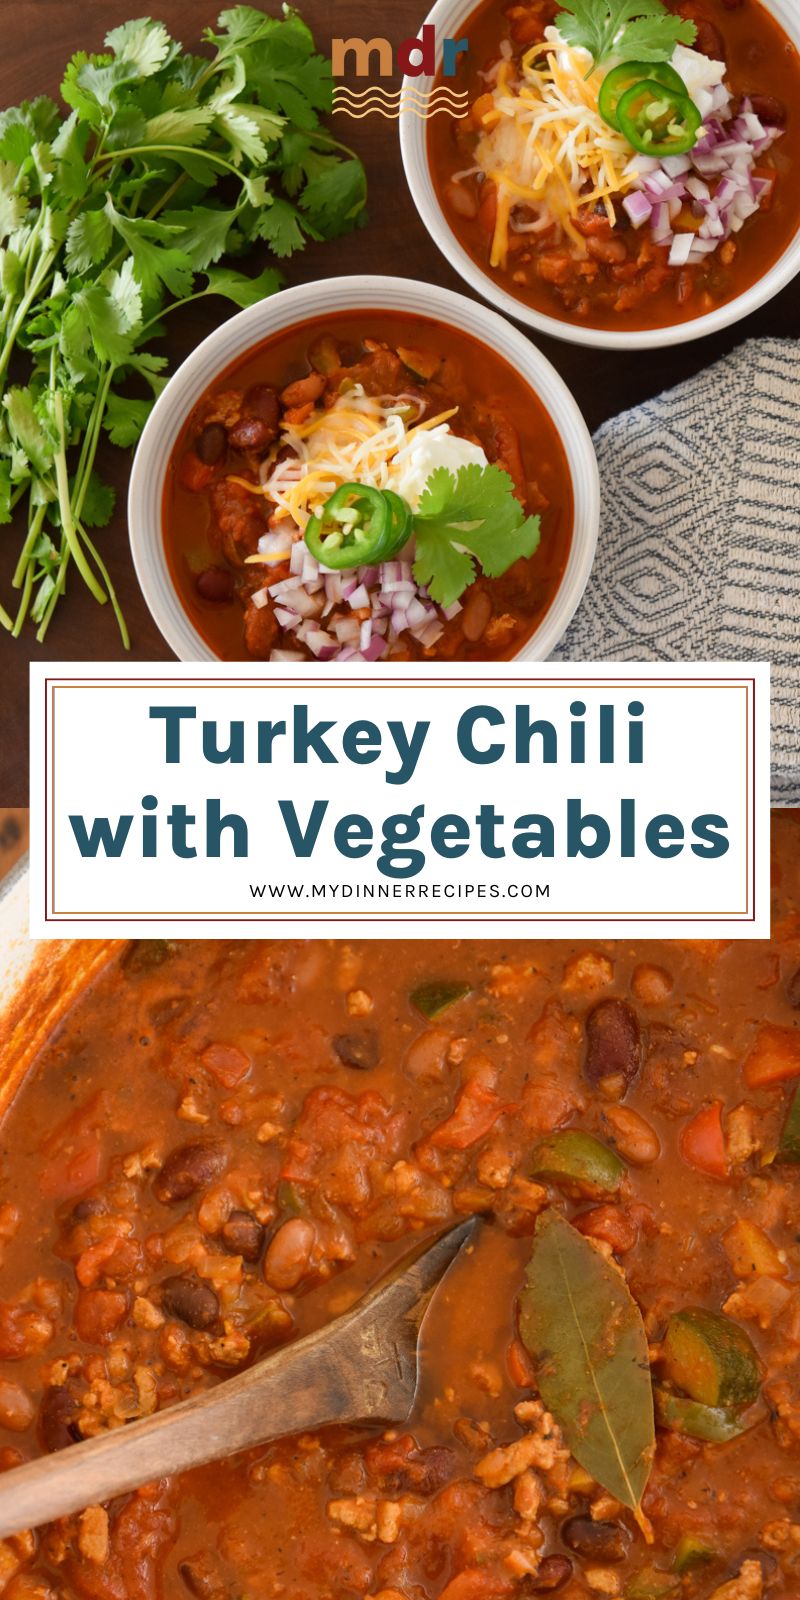 two bowls of turkey chili with vegetables and a pot of turkey chili with vegetables and a spoon